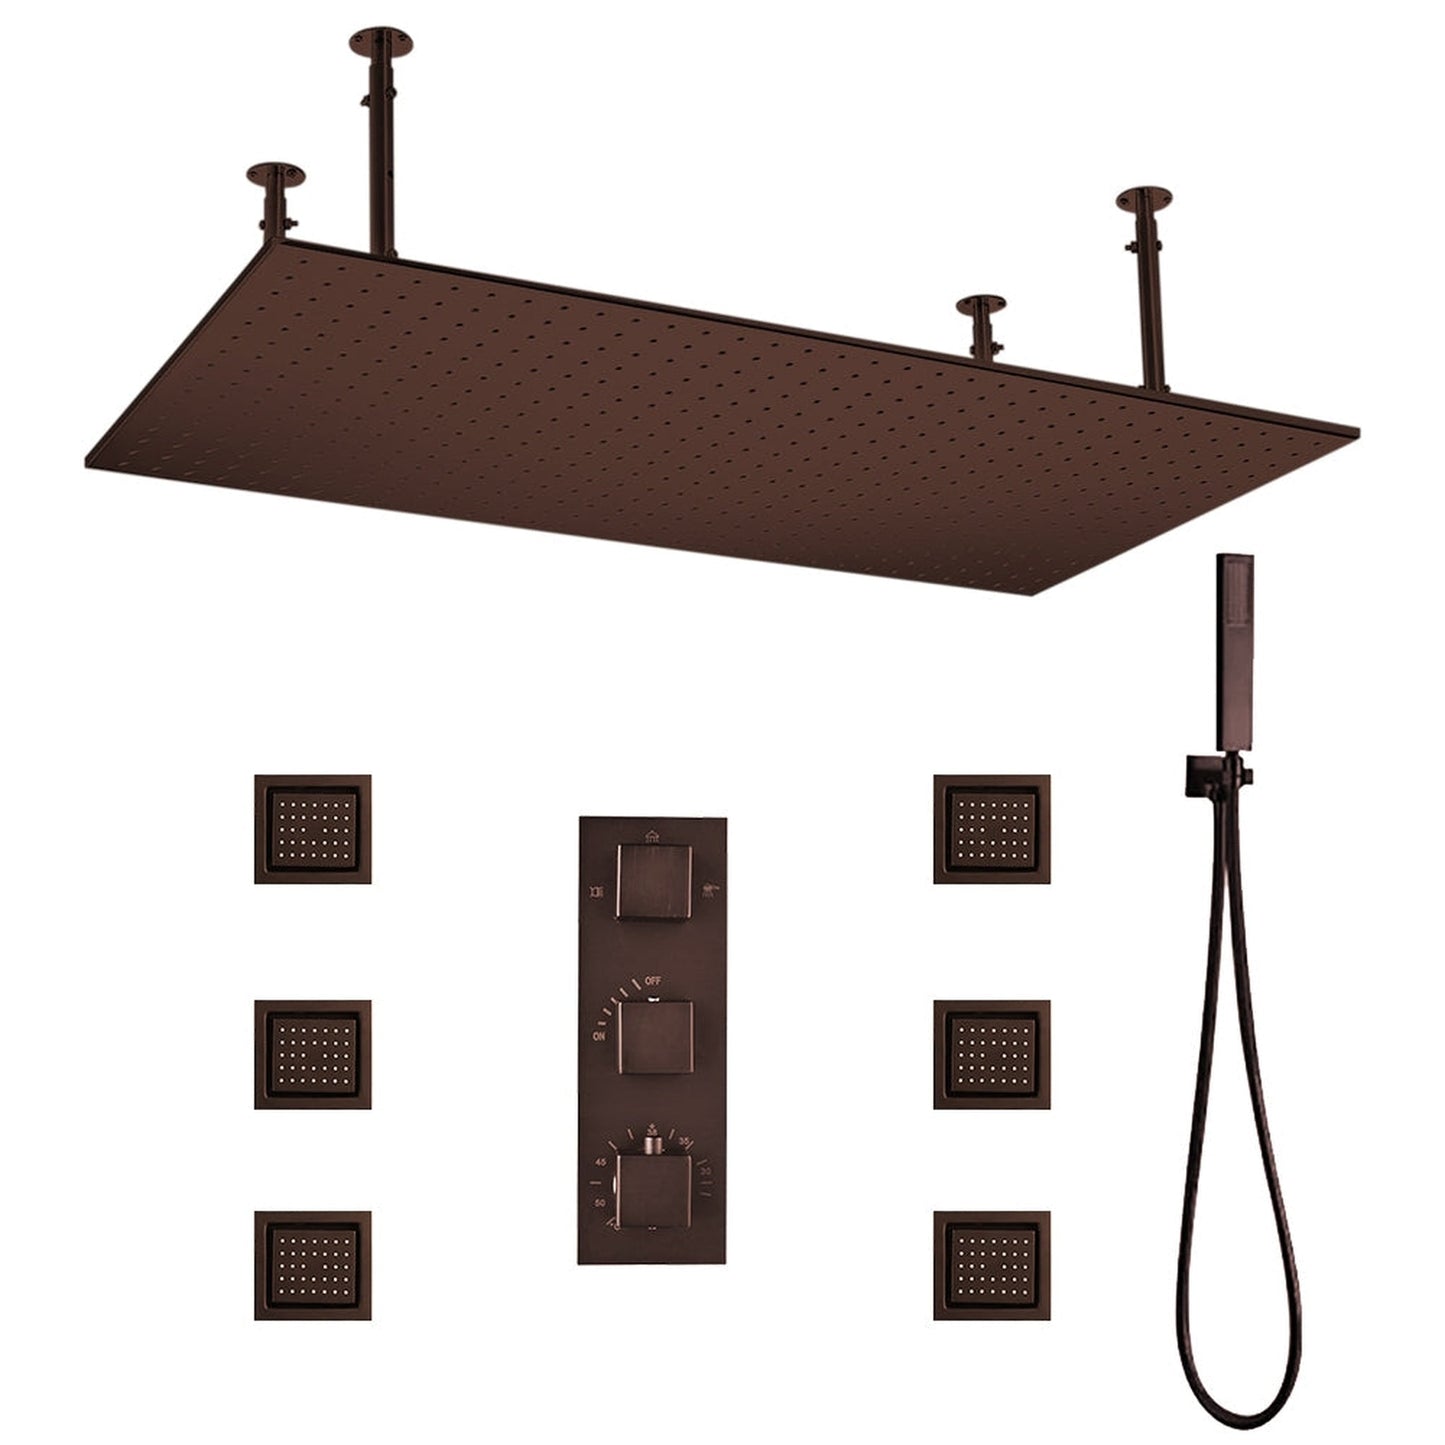 Fontana Diadema Creative Luxury Large Light Oil Rubbed Bronze Rectangular Ceiling Mounted LED Solid Brass Shower Head Rain Shower System With 6-Jet Body Sprays and Hand Shower